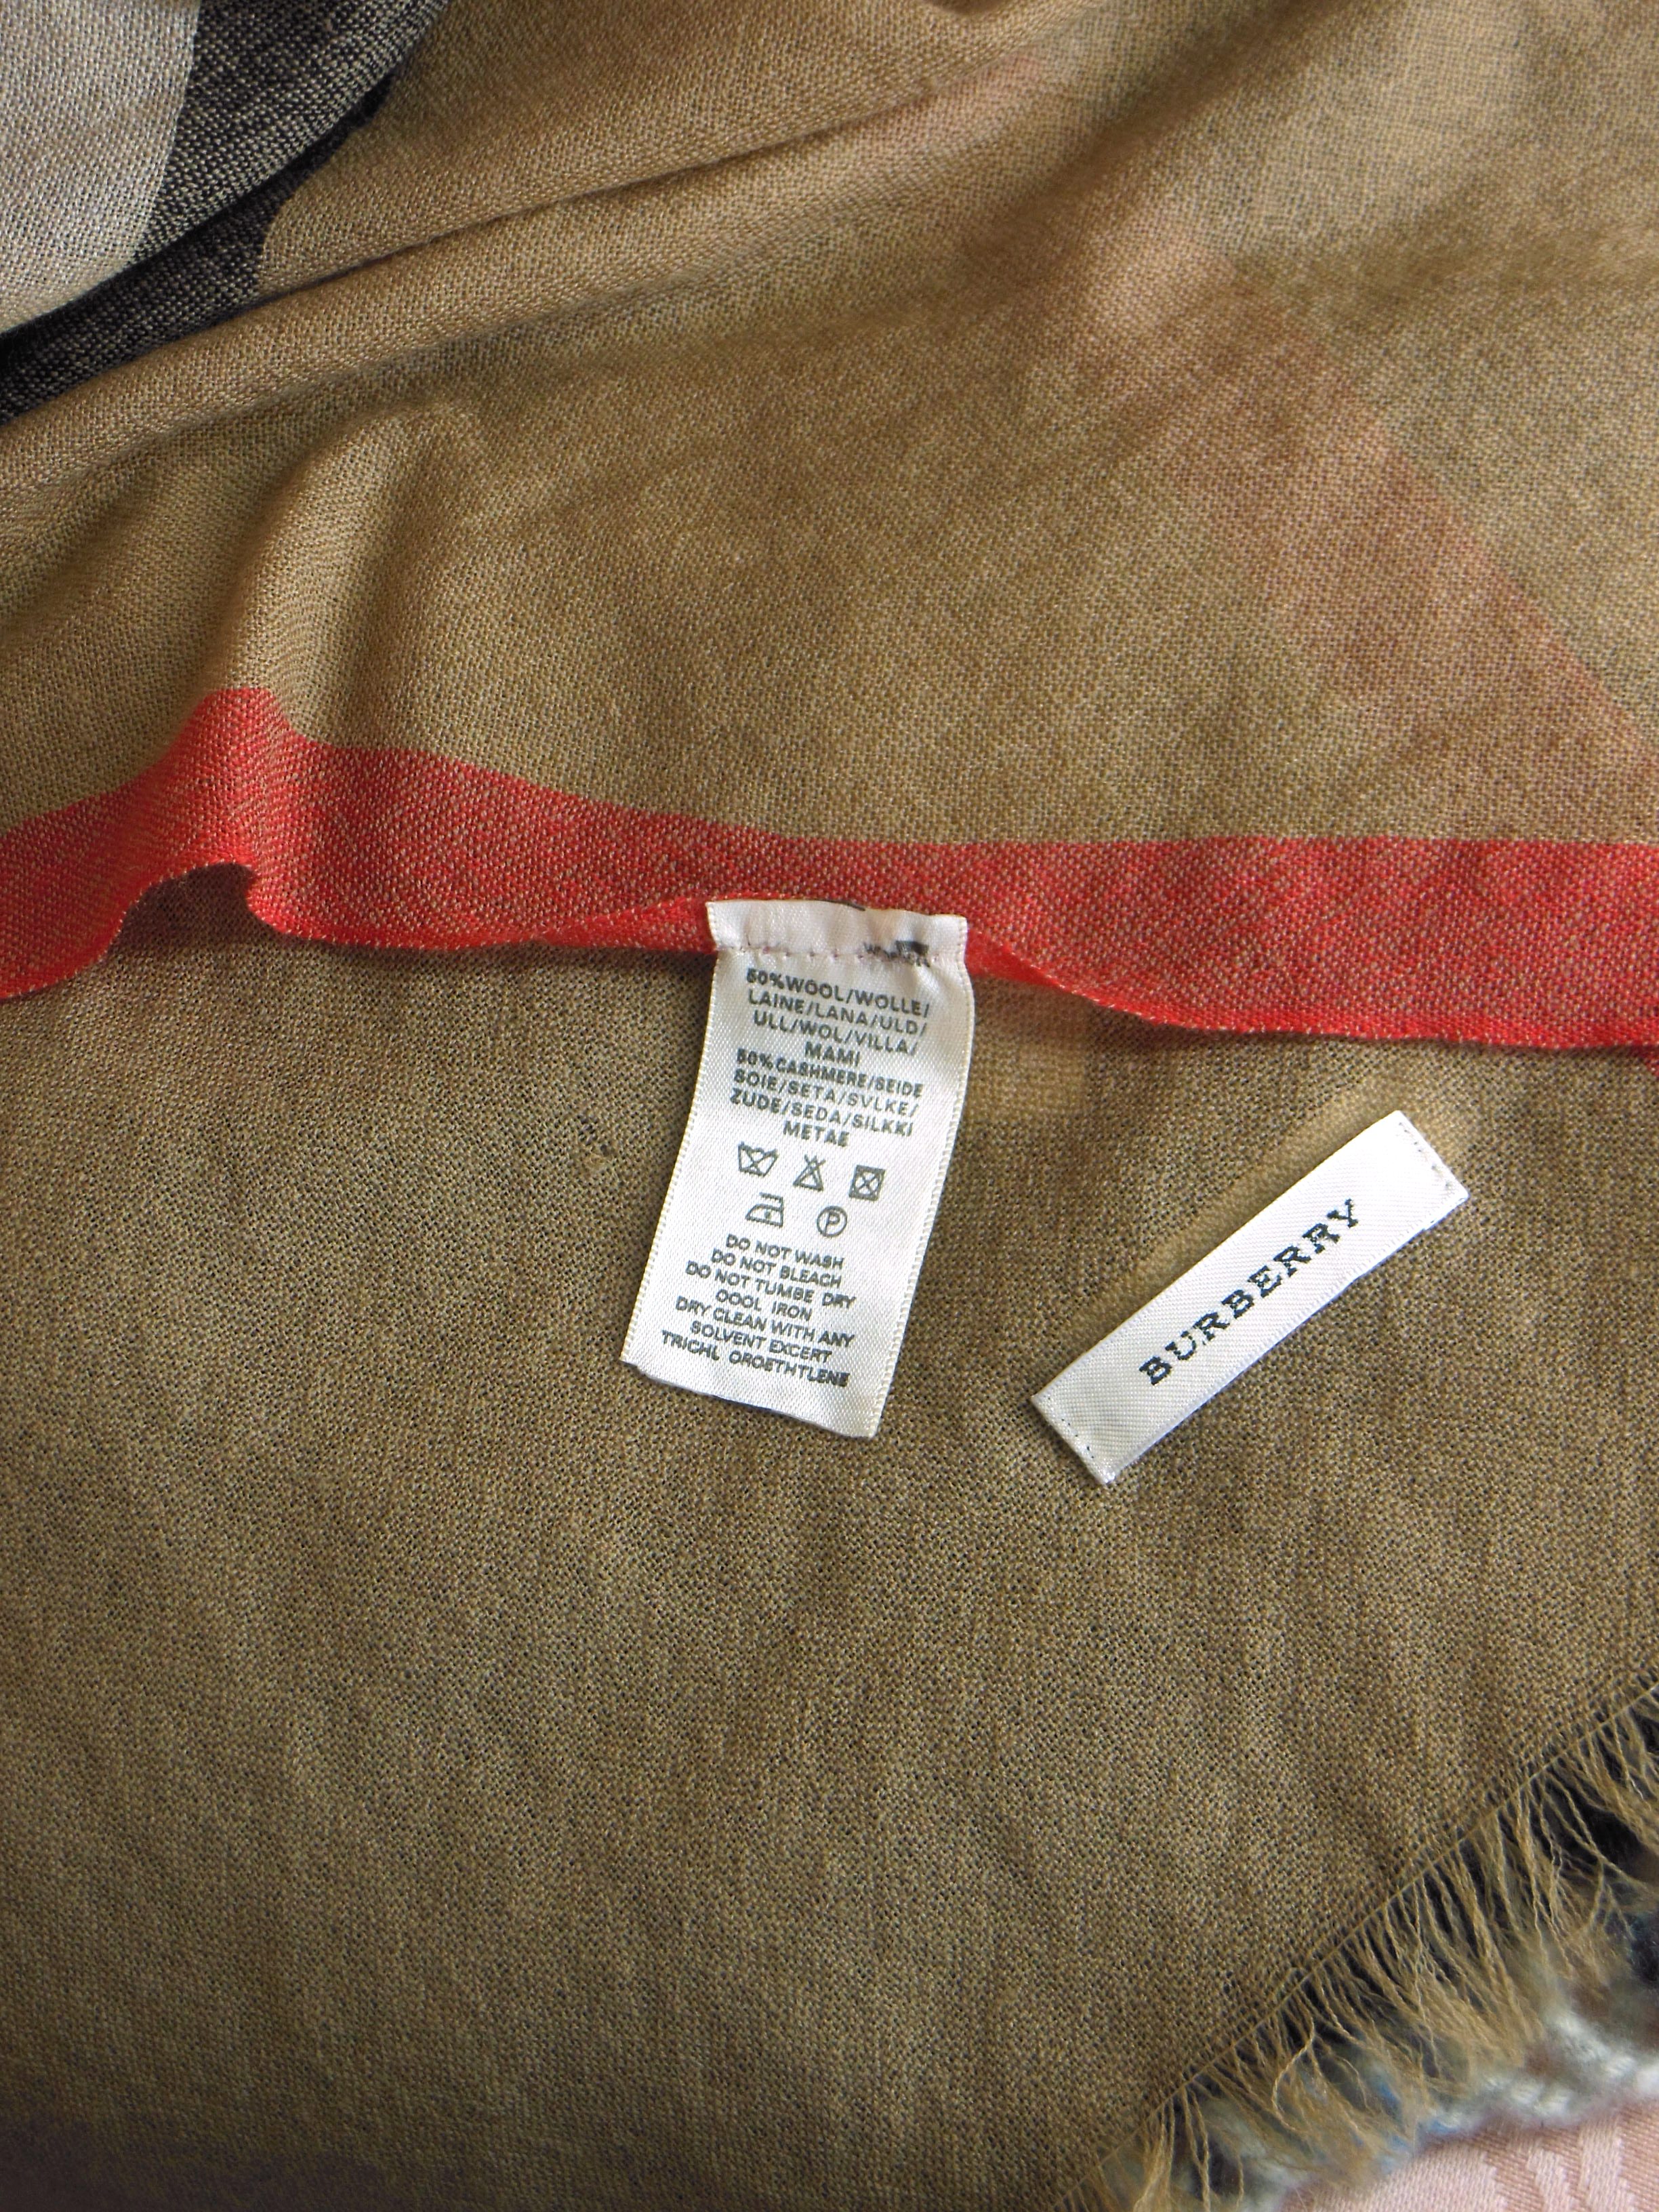 burberry tags